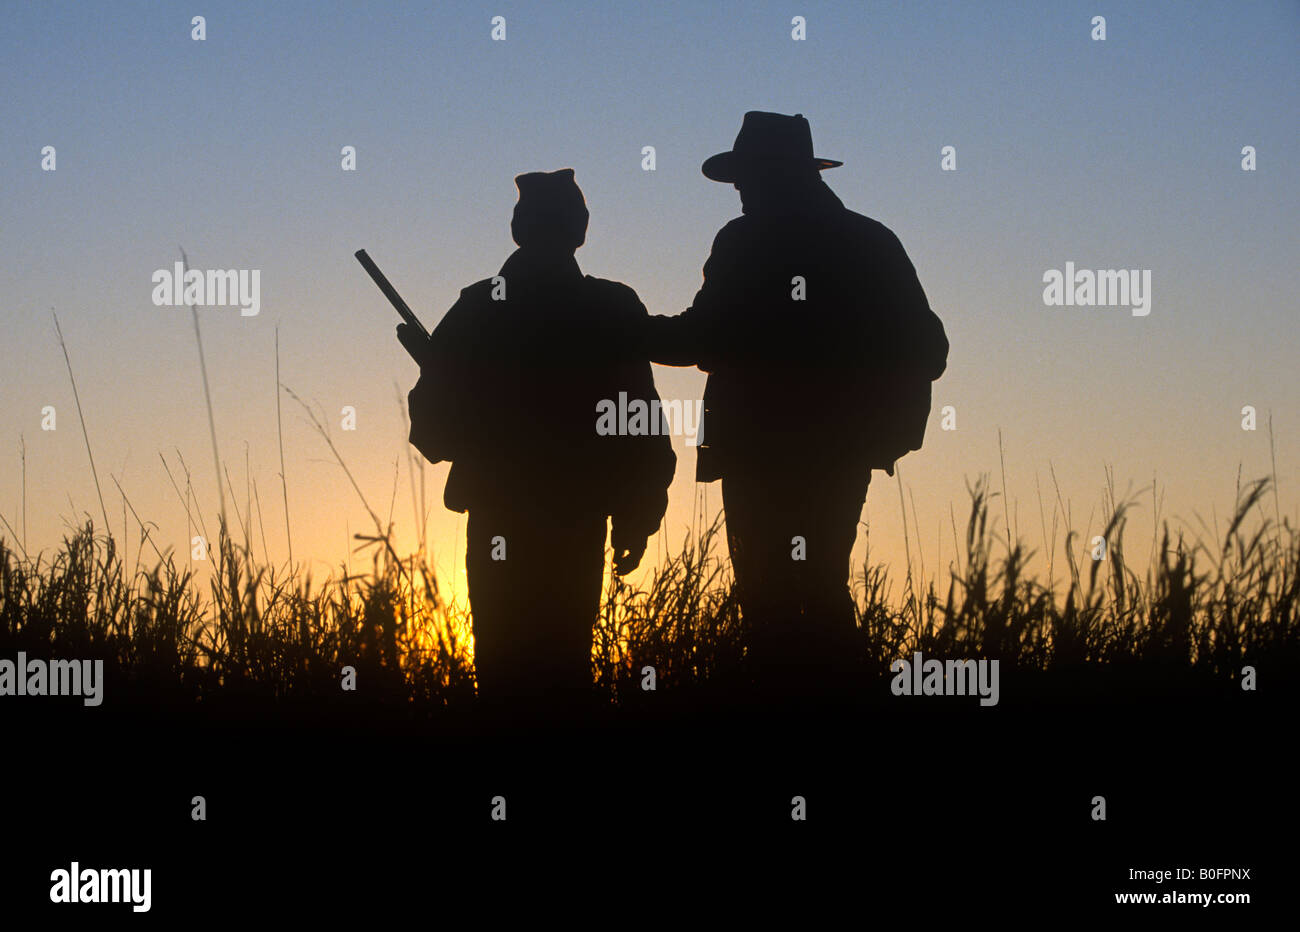 A father and son bird hunting in a grassy field at the end of the day. Stock Photo